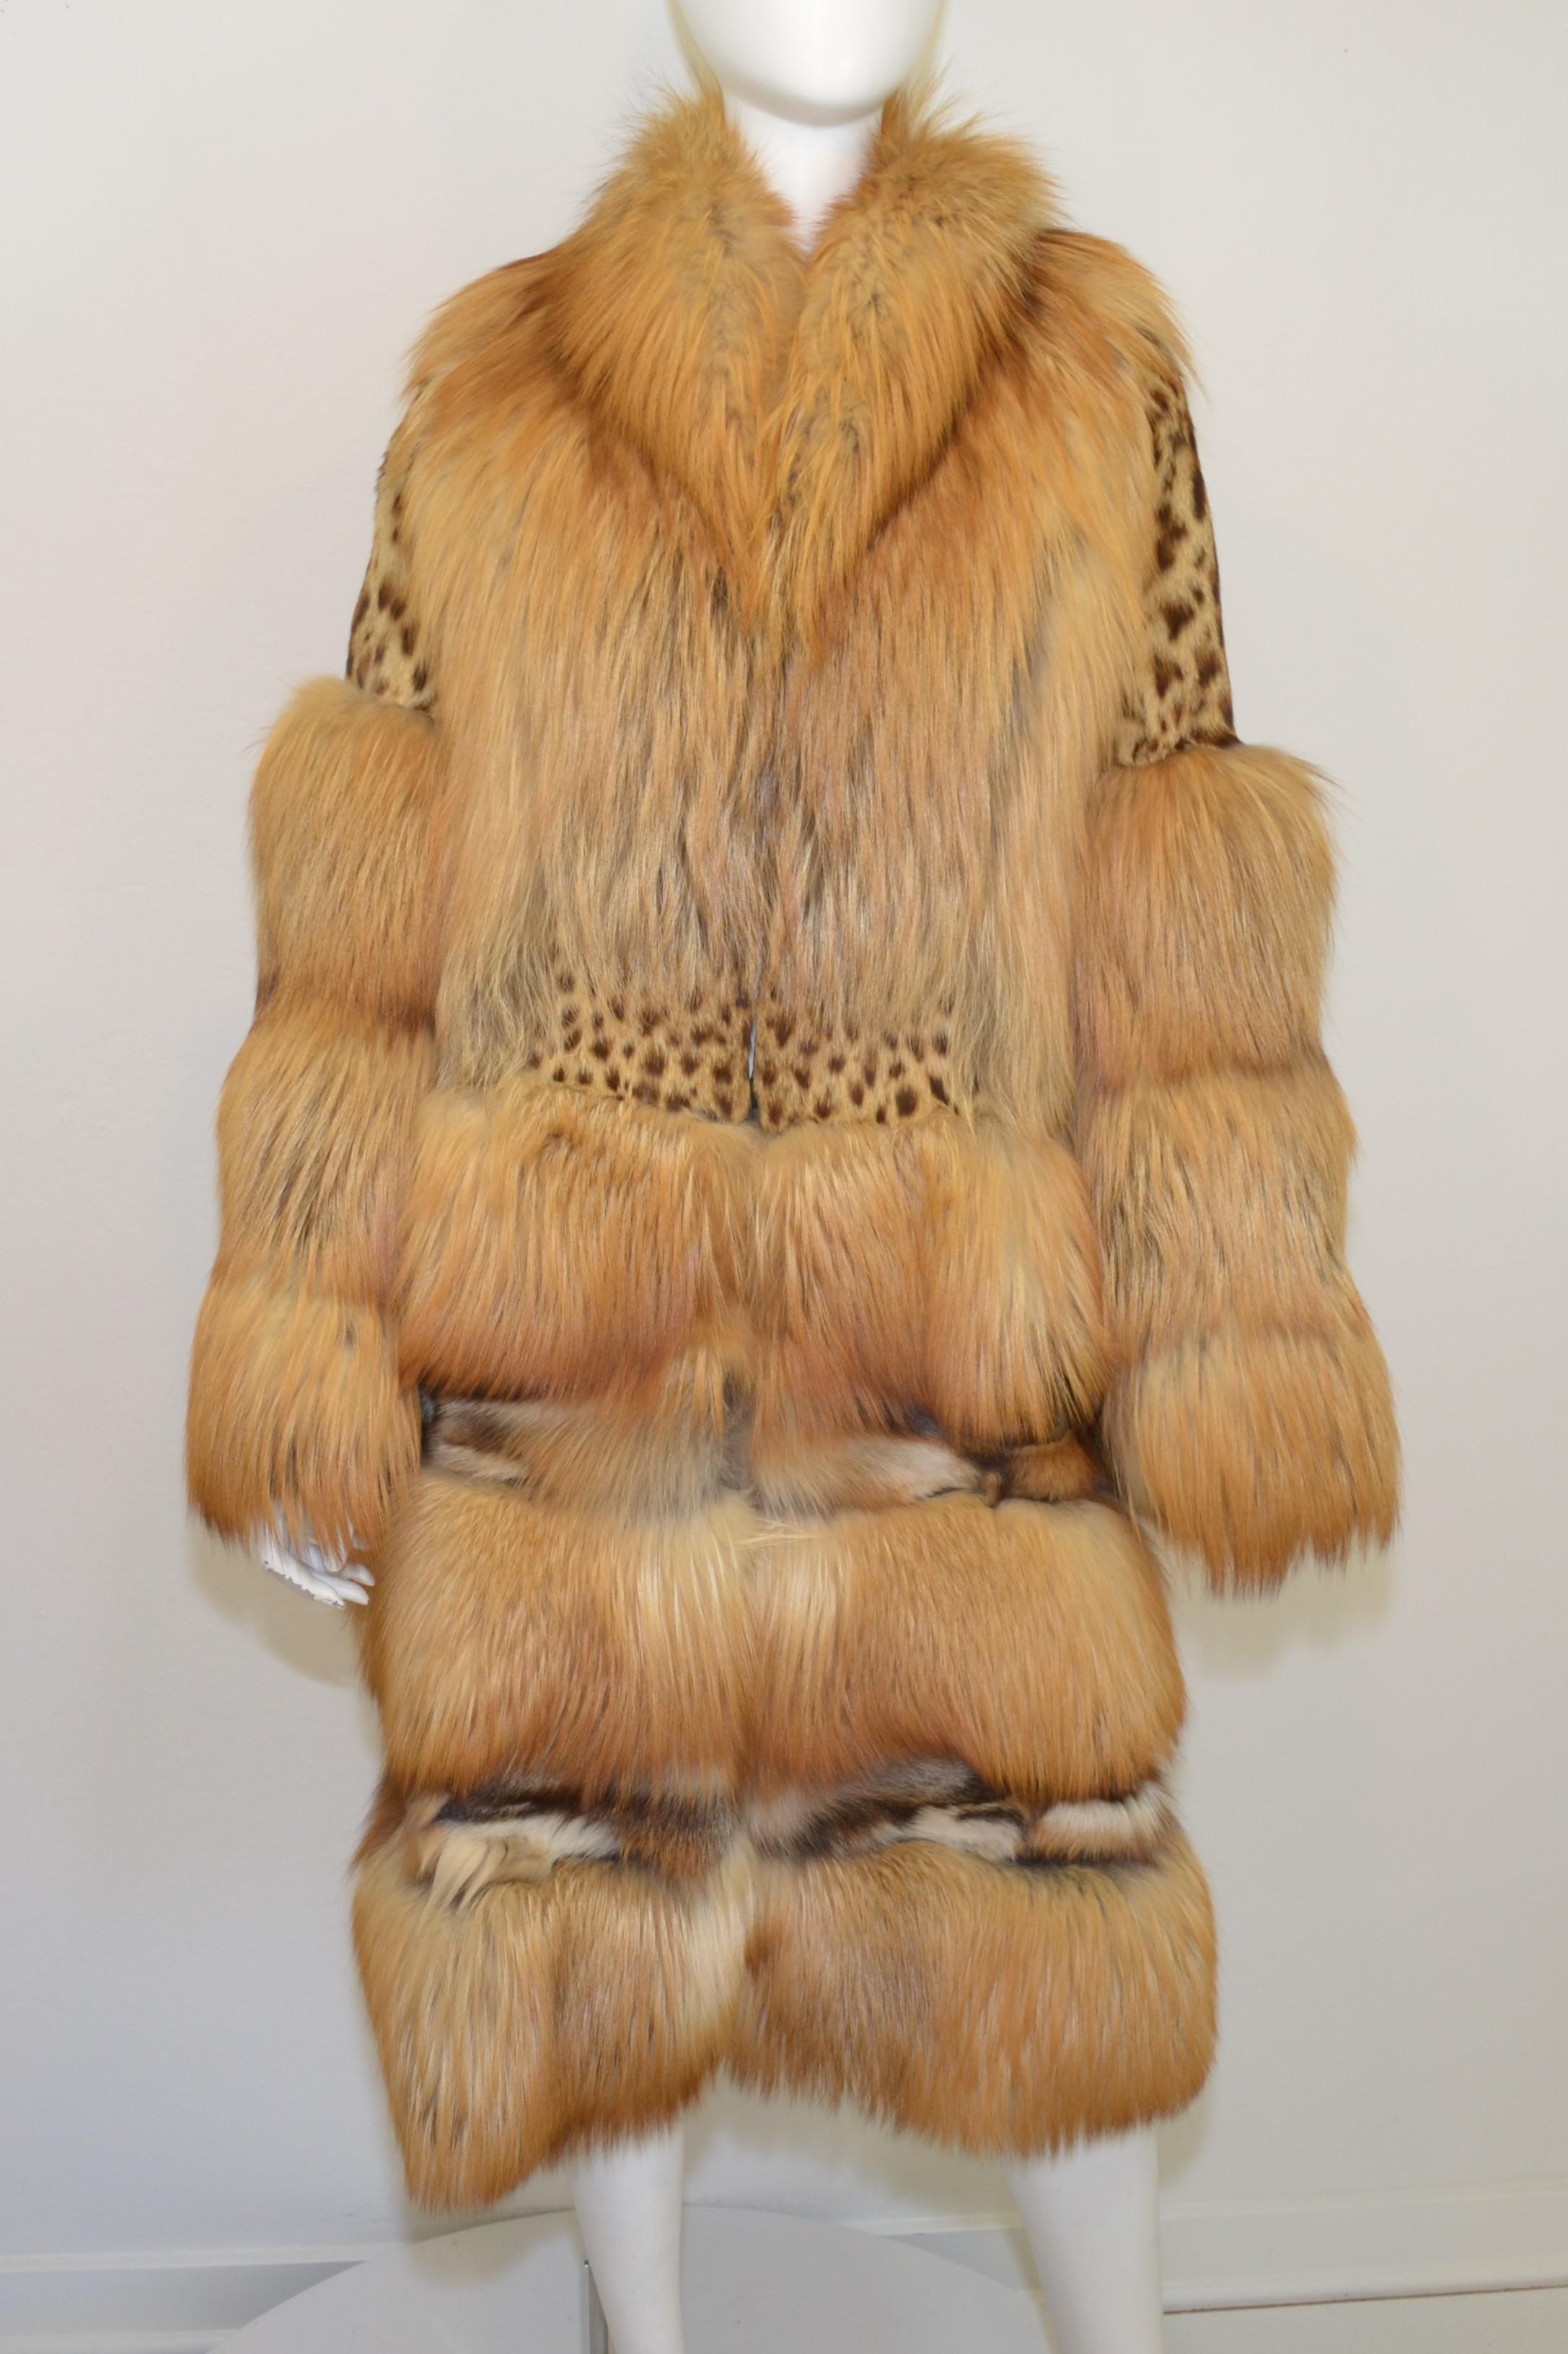 Amazing fur coat by Tom Ford for Gucci from the Fall 1999-2000 Runway collection. Coat features hook and eye fastenings along the front and snap buttons along the waist to convert from a long to short length. Fully lined in leather, leather panels